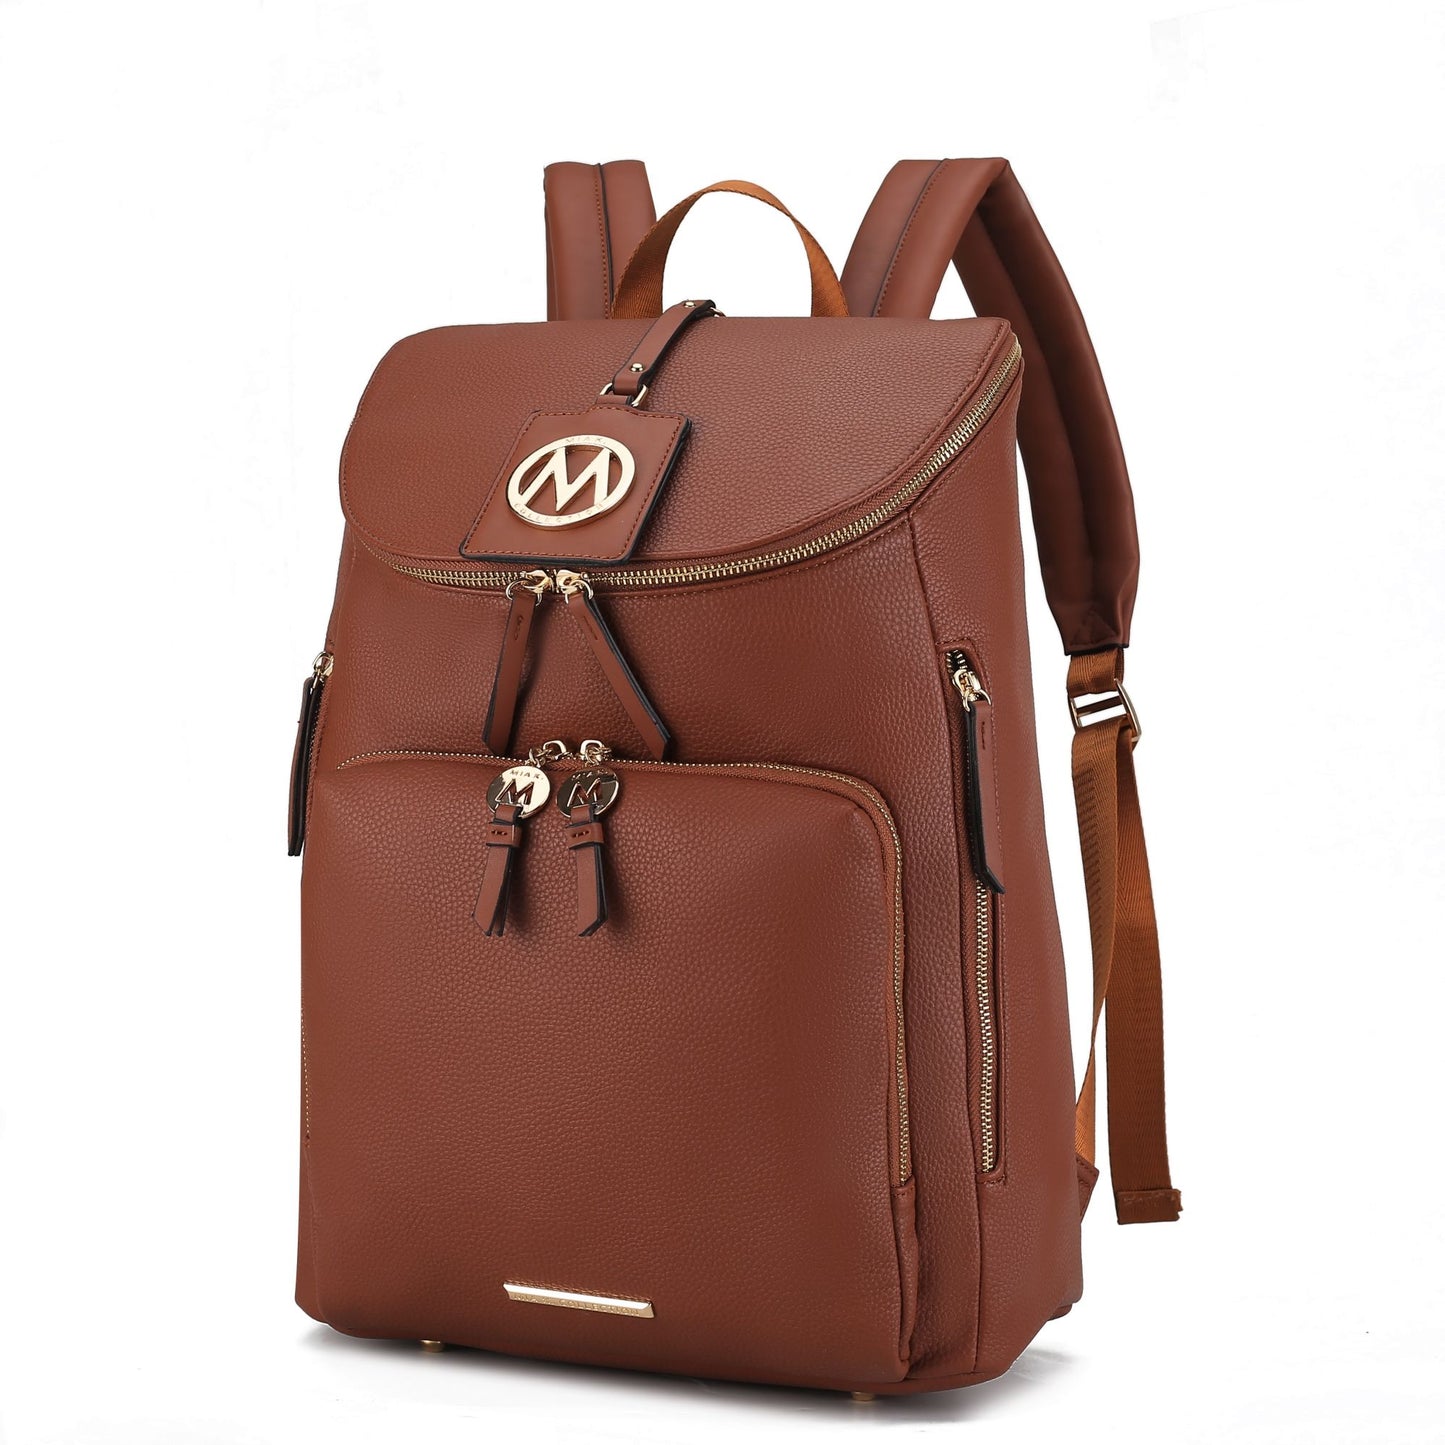 MFK Collection Angela Large Backpack by Mia K